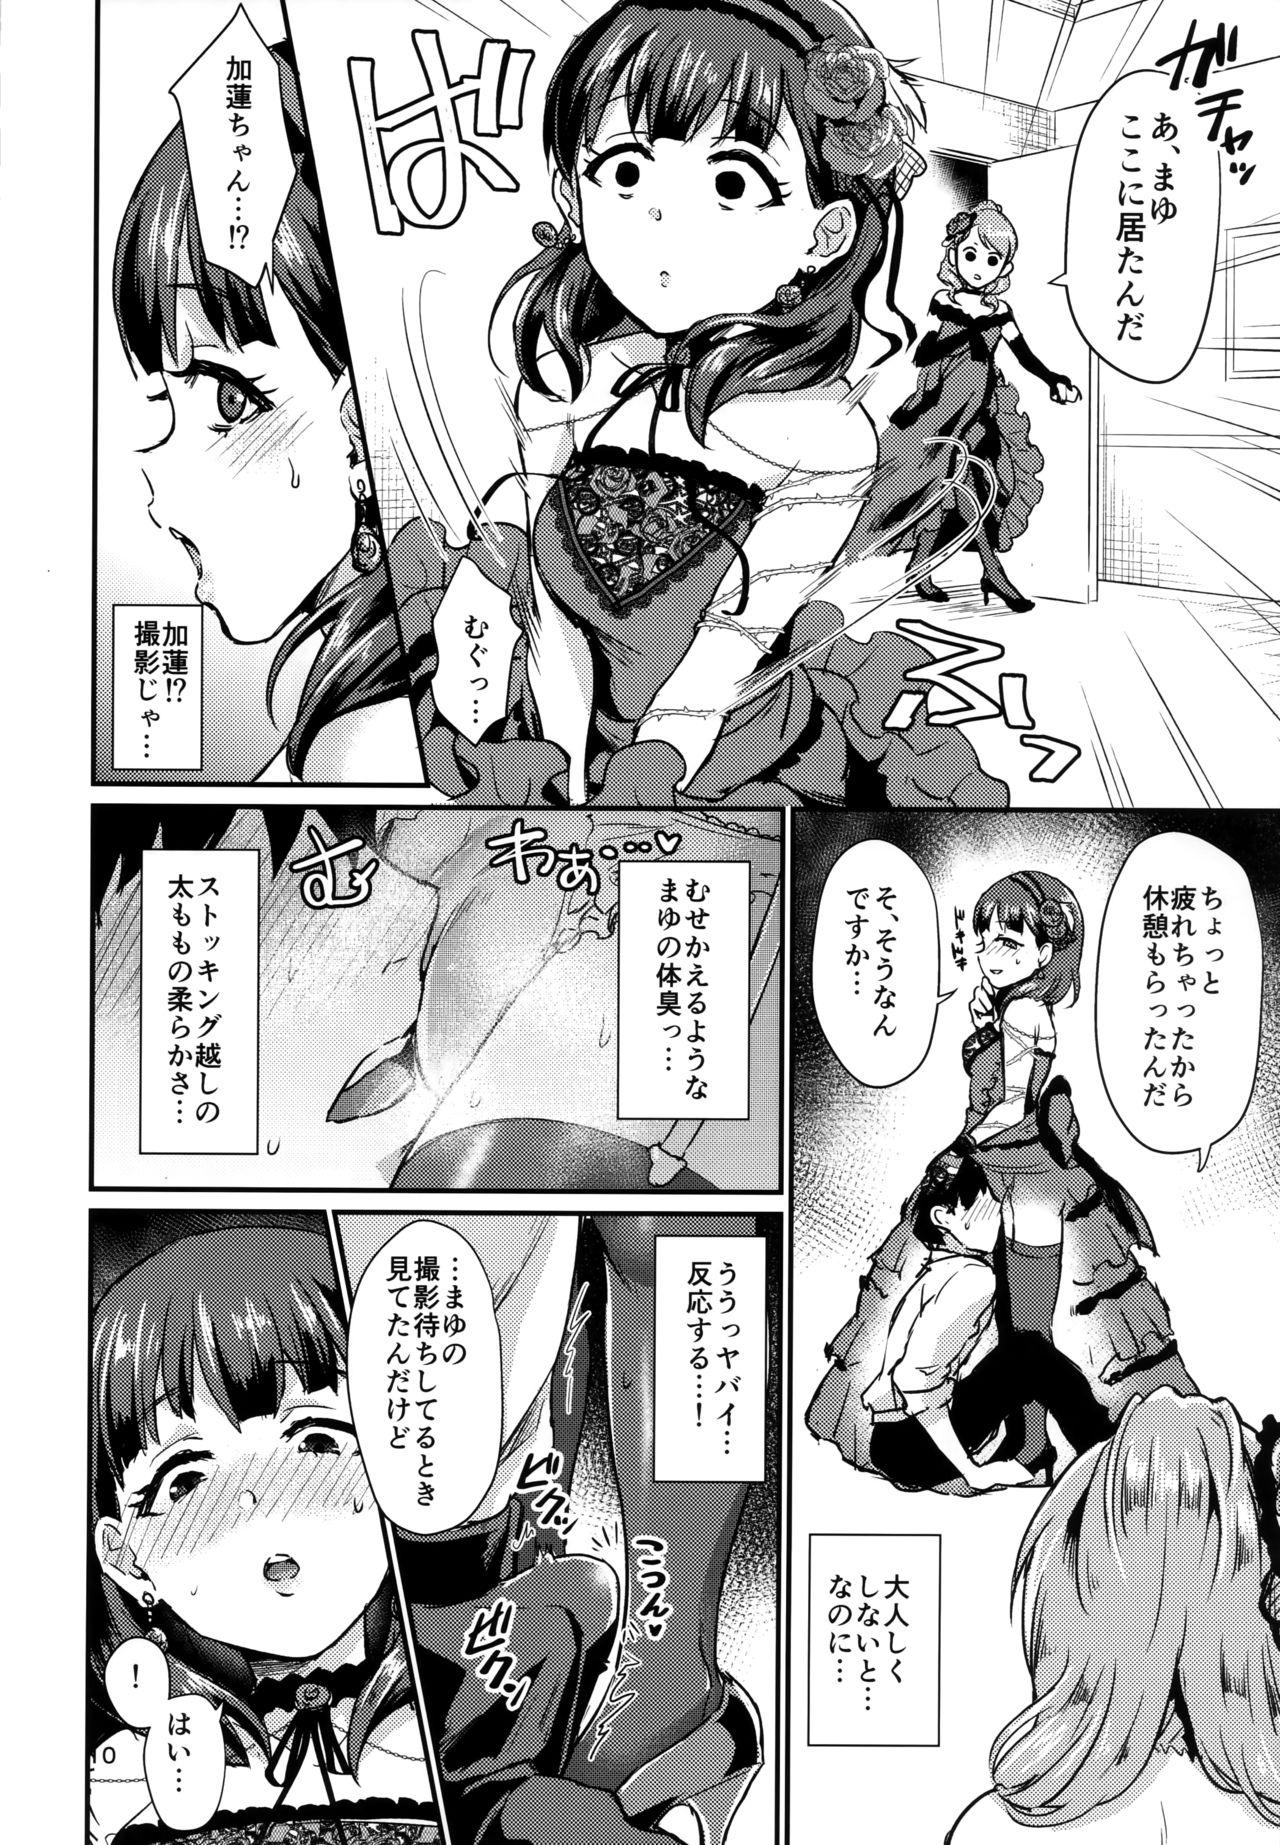 Granny Don't stop my pure love - The idolmaster Gozada - Page 9